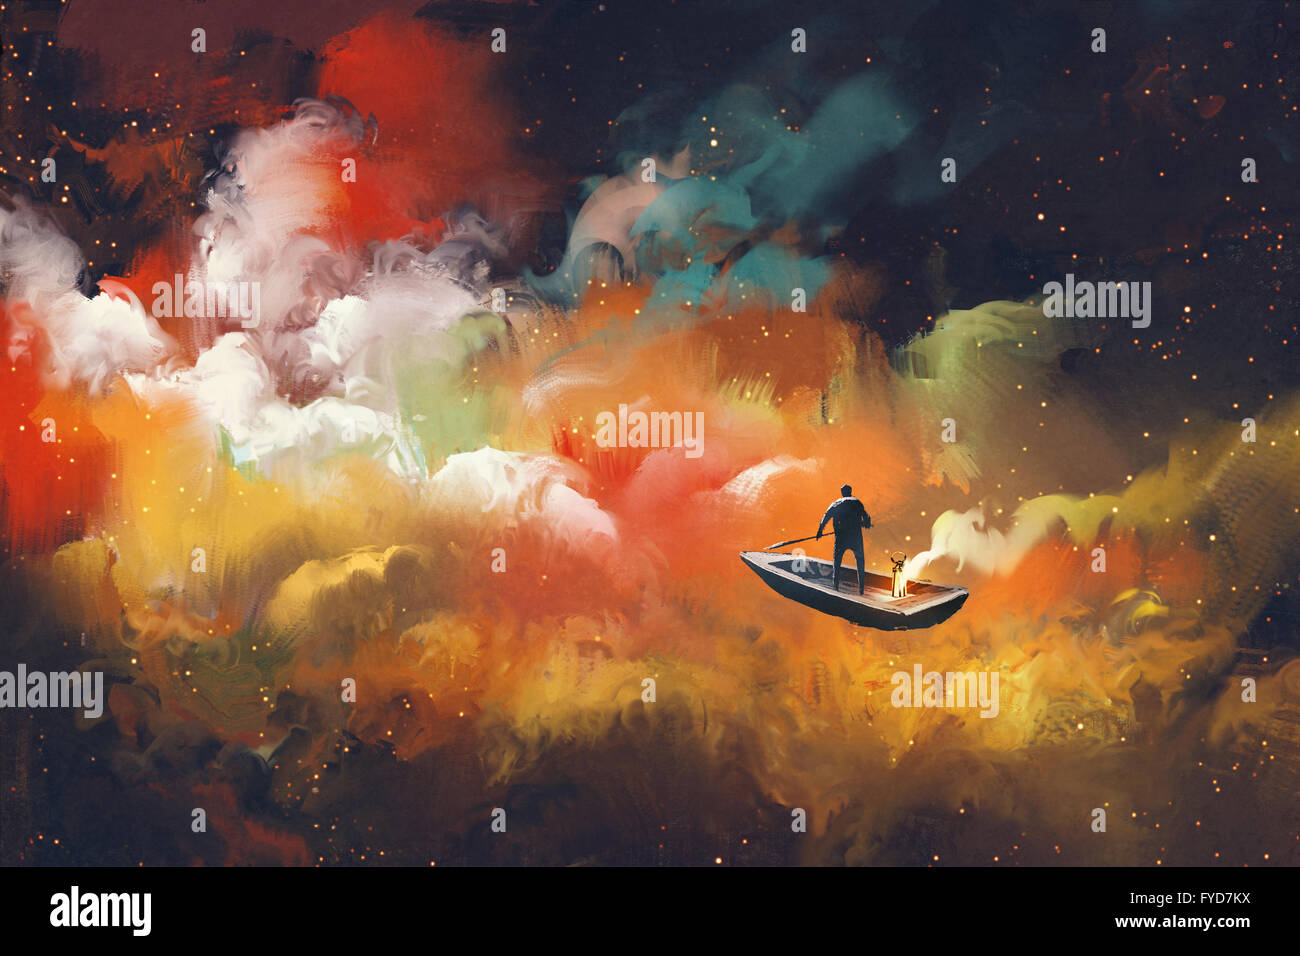 man on a boat in the outer space with colorful cloud,illustration Stock Photo